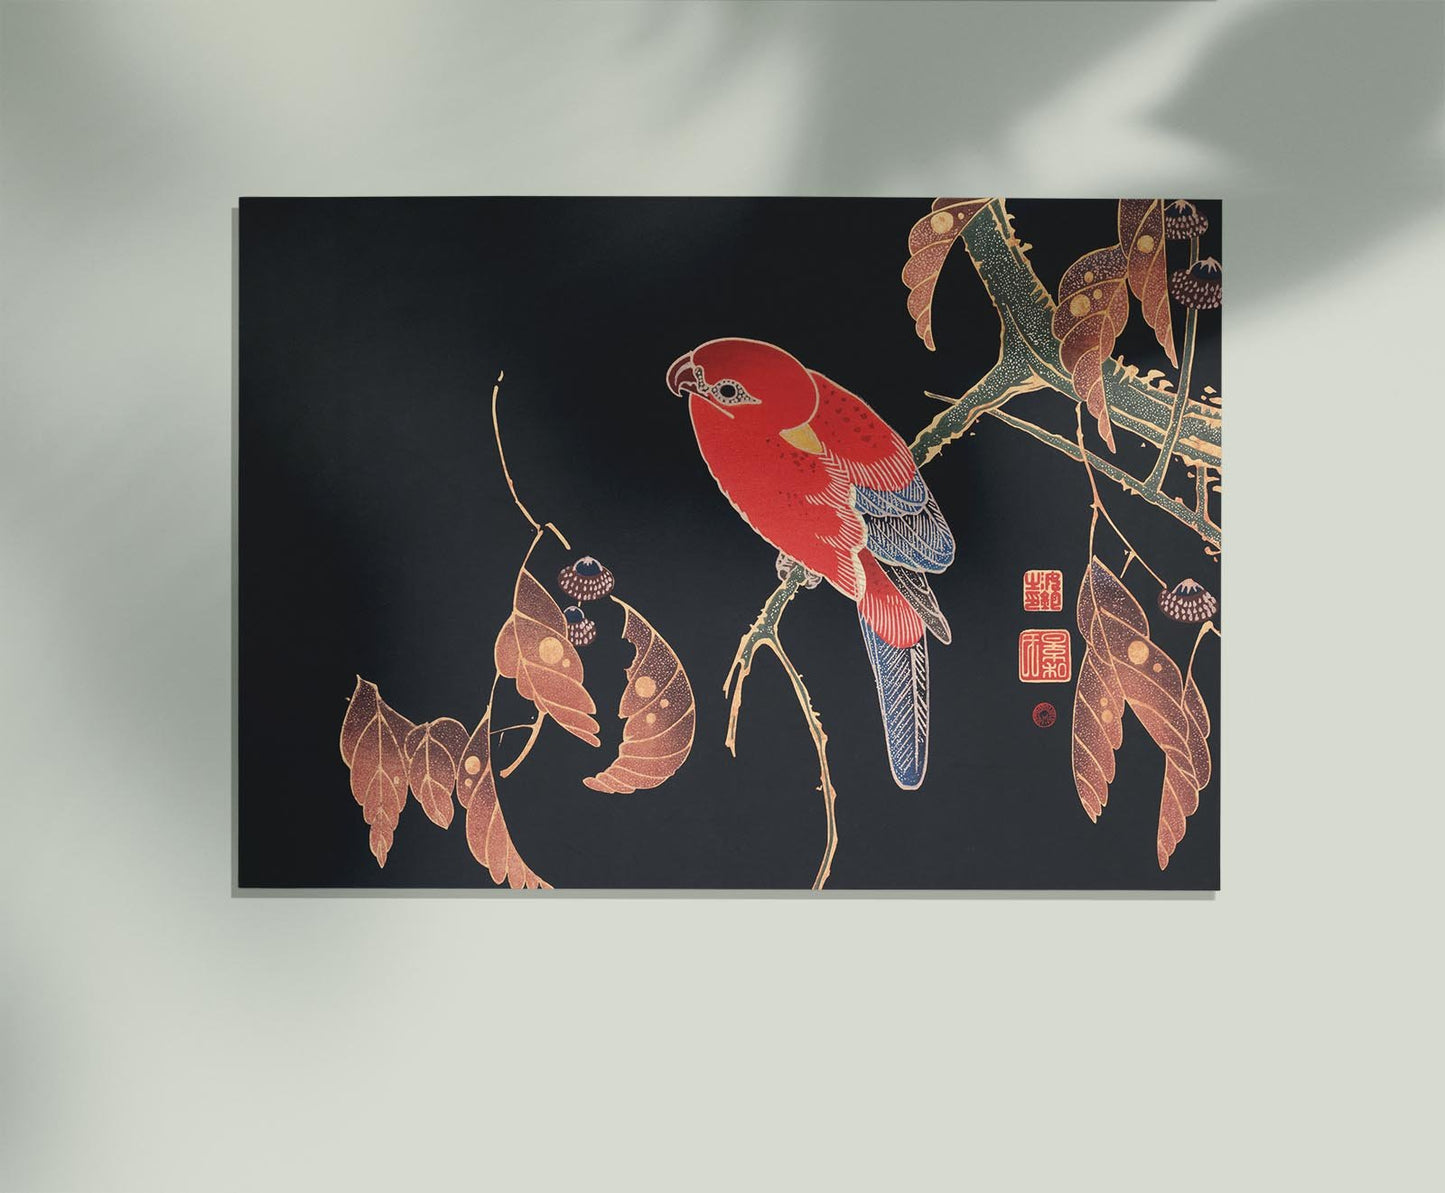 Red Parrot on the Branch of a Tree by Ito Jakuchu